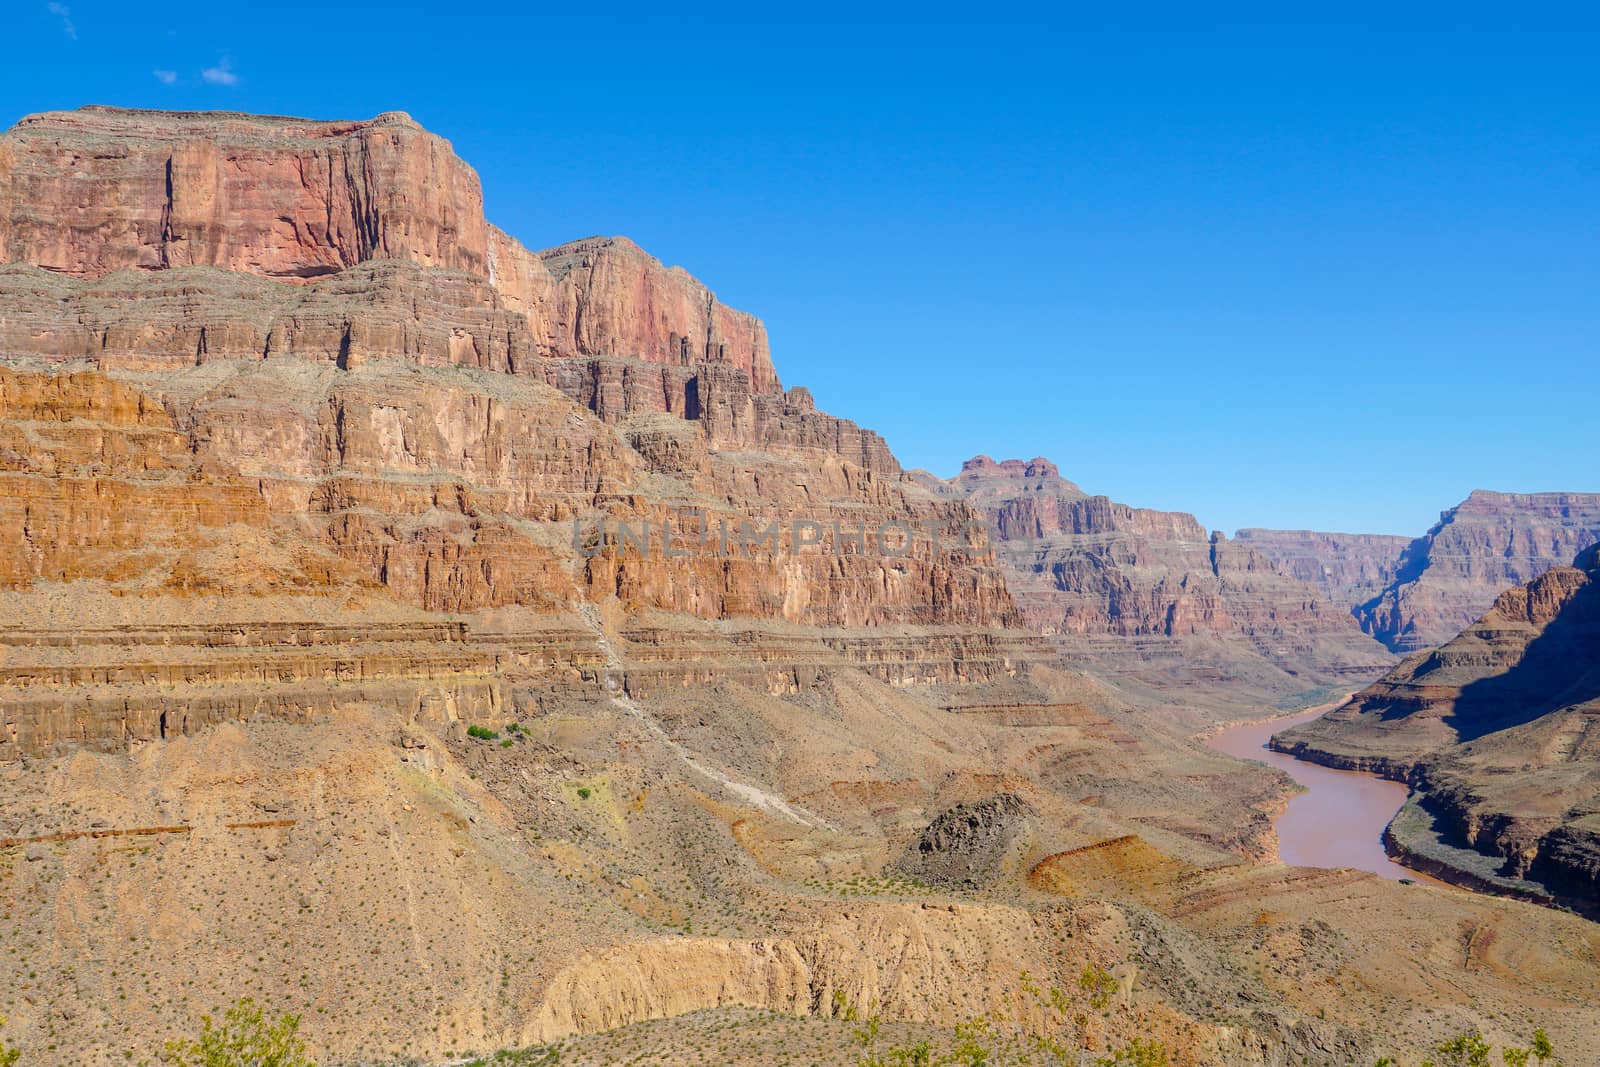 Landscape view of Grand Canyon National Park with Colorado river during sunny day. Arizona, USA by Bonandbon